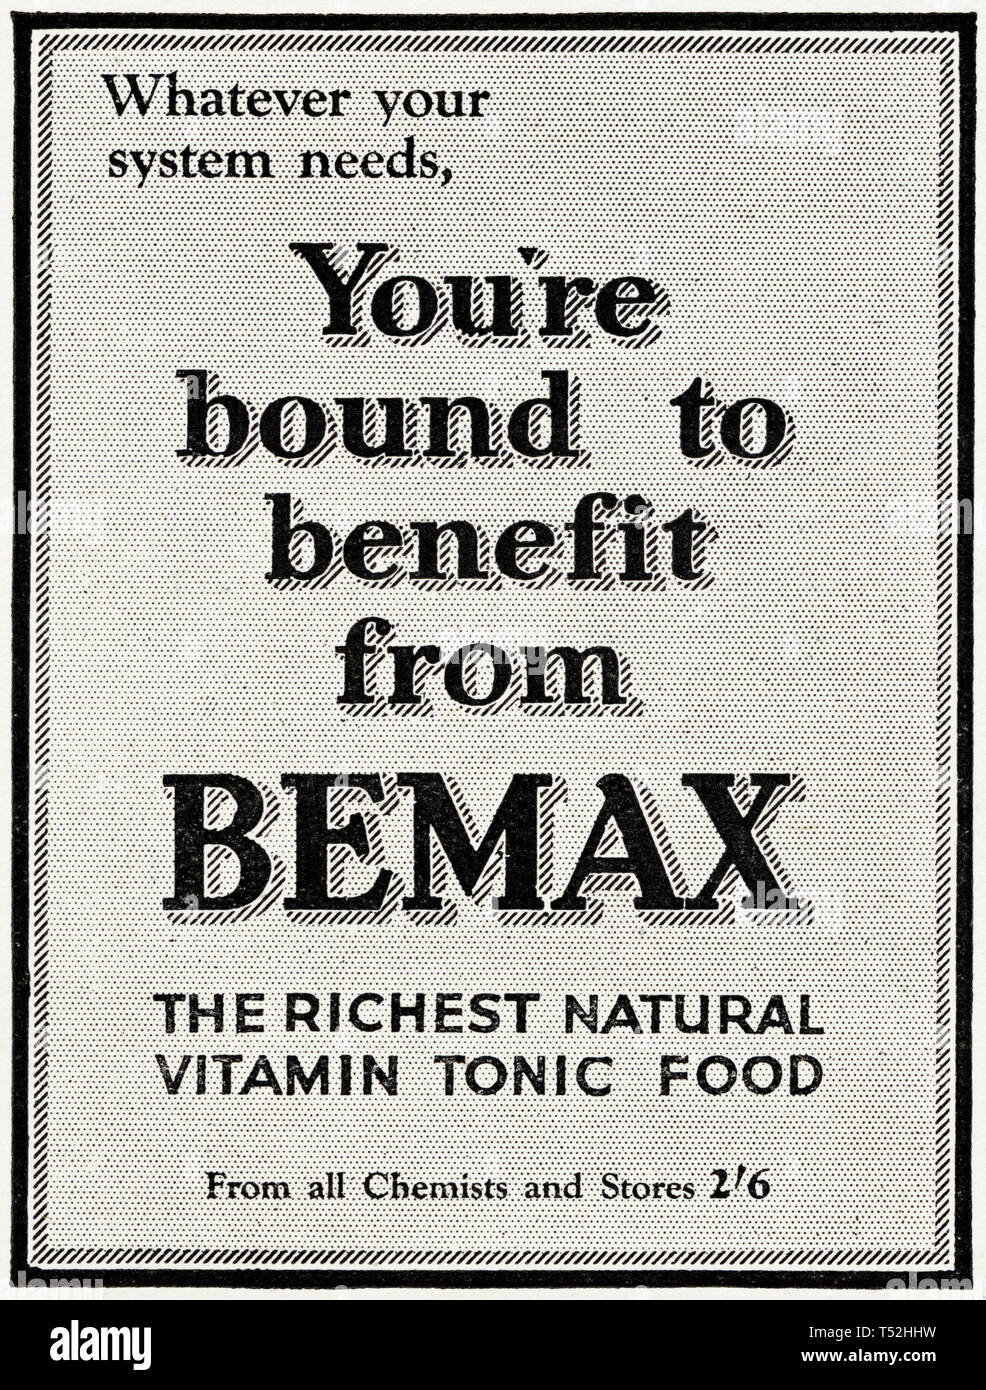 Original 1930s vintage old print advertisement from 30s English magazine advertising Bemax the richest natural vitamin tonic food circa 1932 Stock Photo